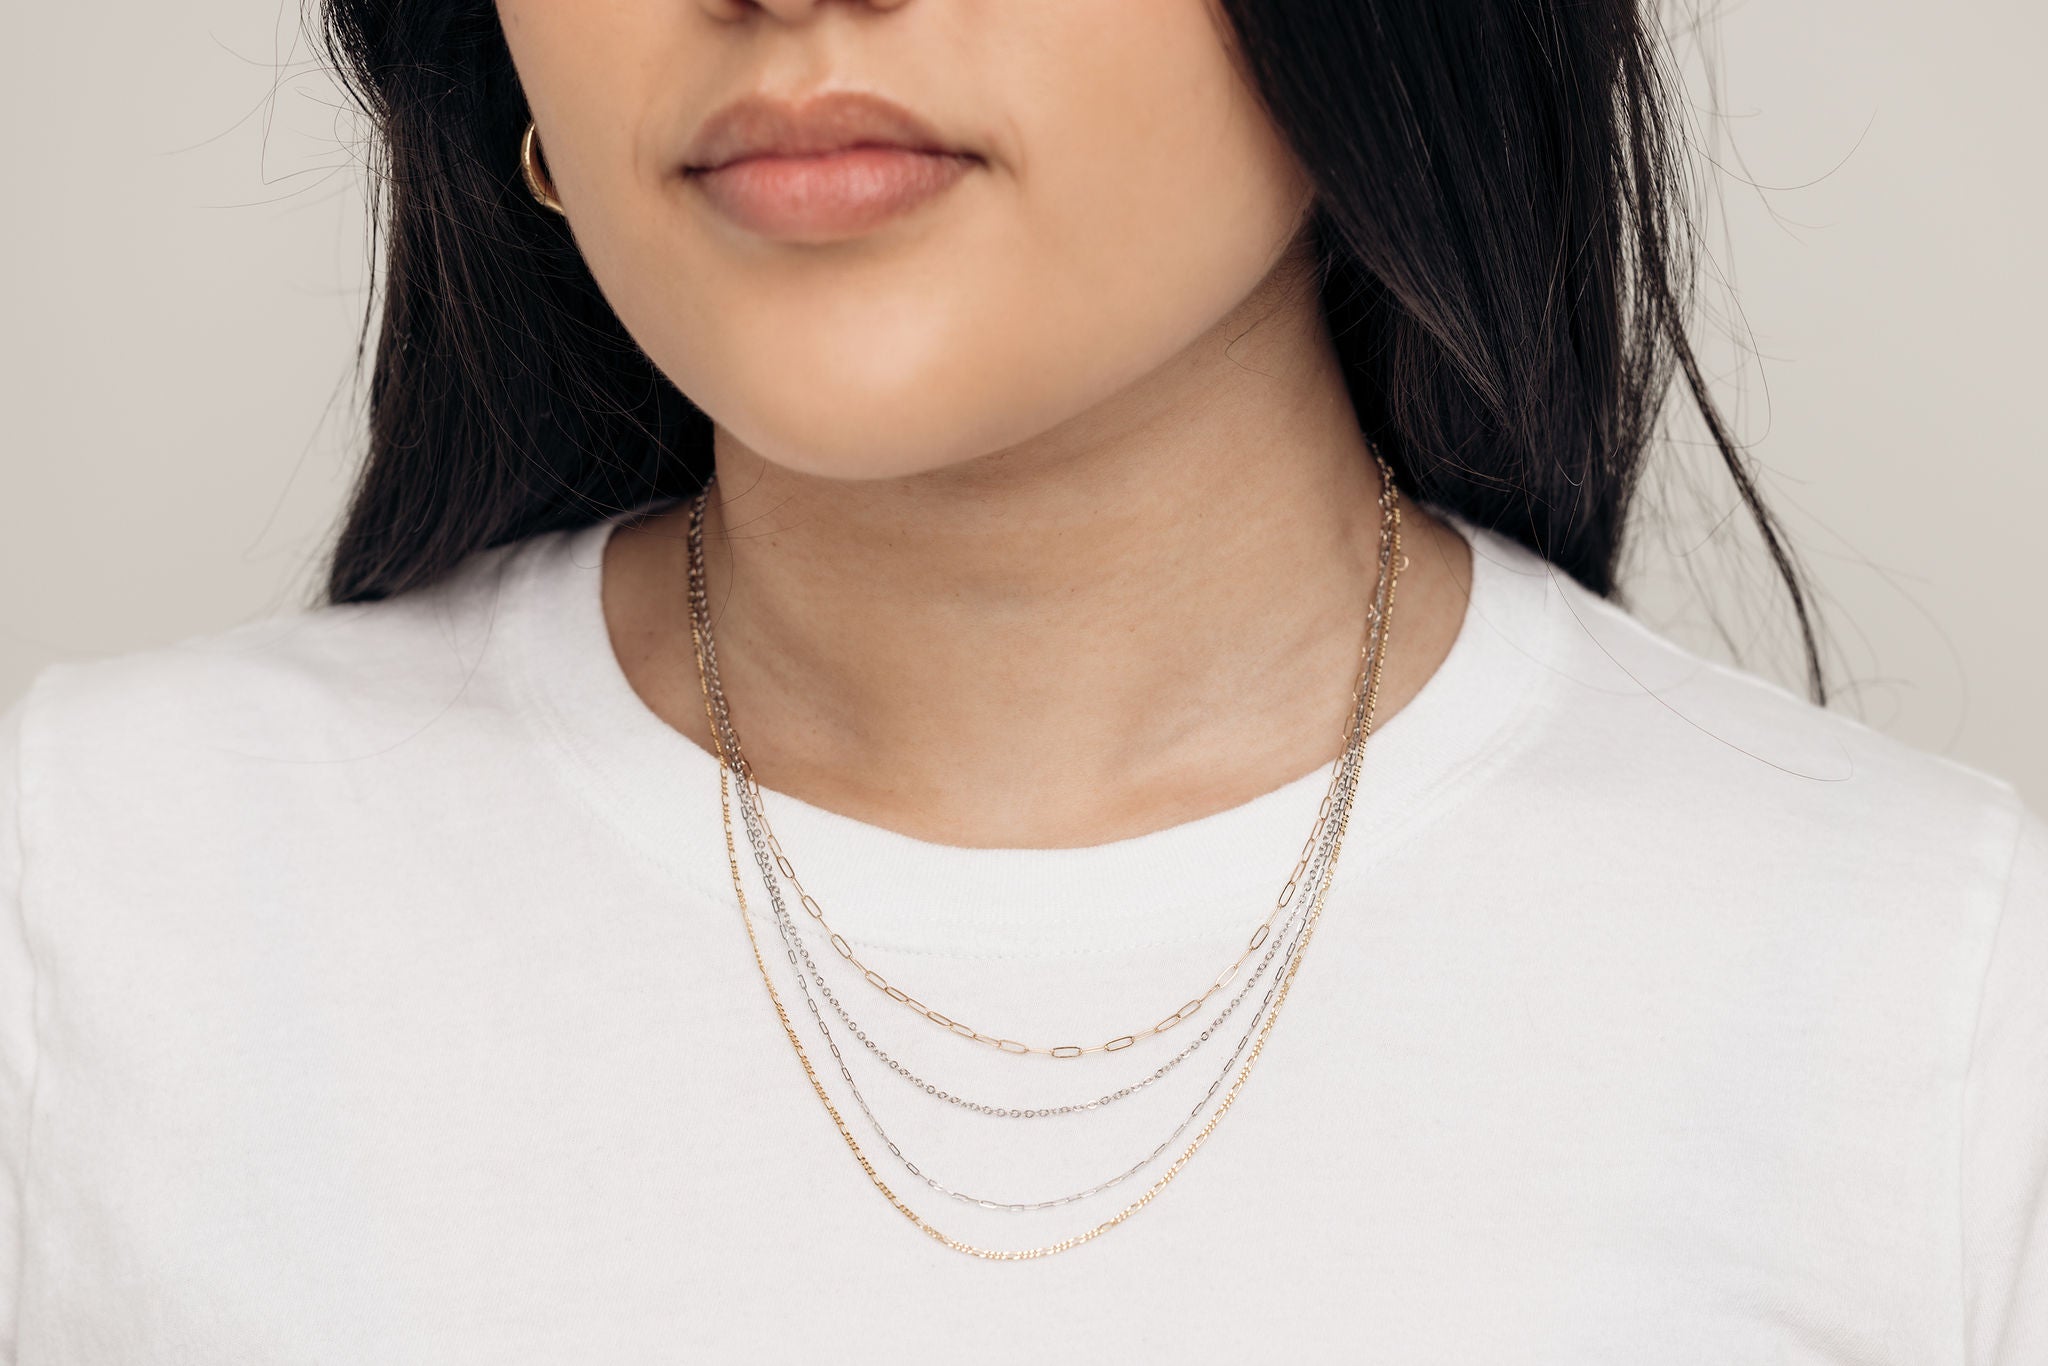 14k-gold-chain-necklace-stack-on-woman-3_923a4106-ee8f-4fed-afcb-ec104e143387.jpg